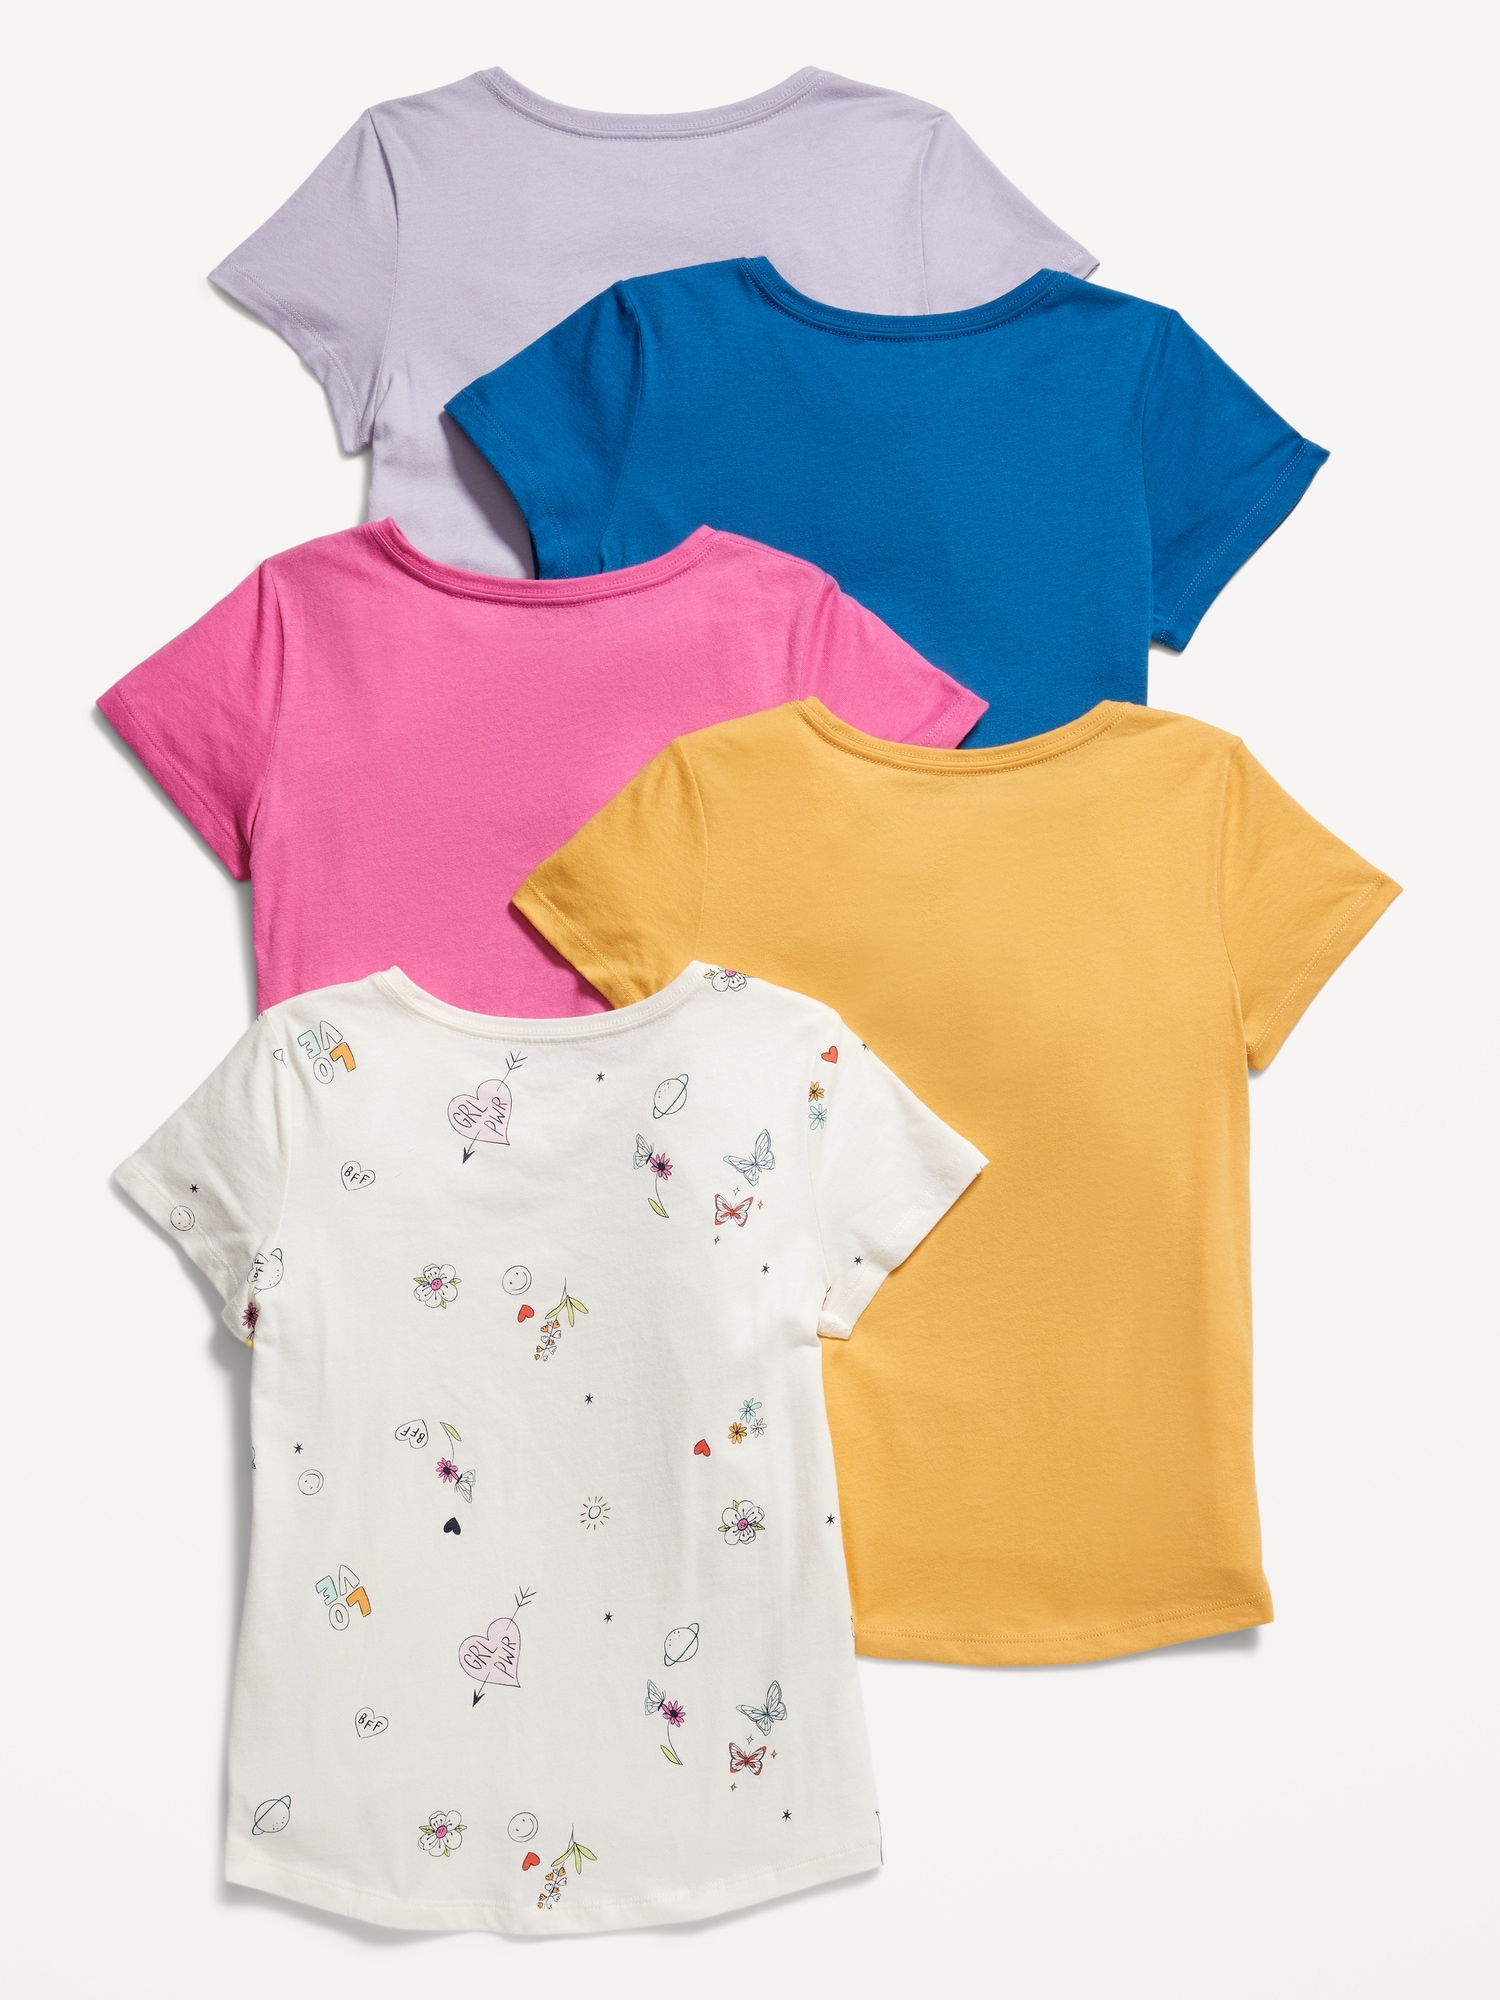 softest-printed-t-shirt-5-pack-for-girls-old-navy